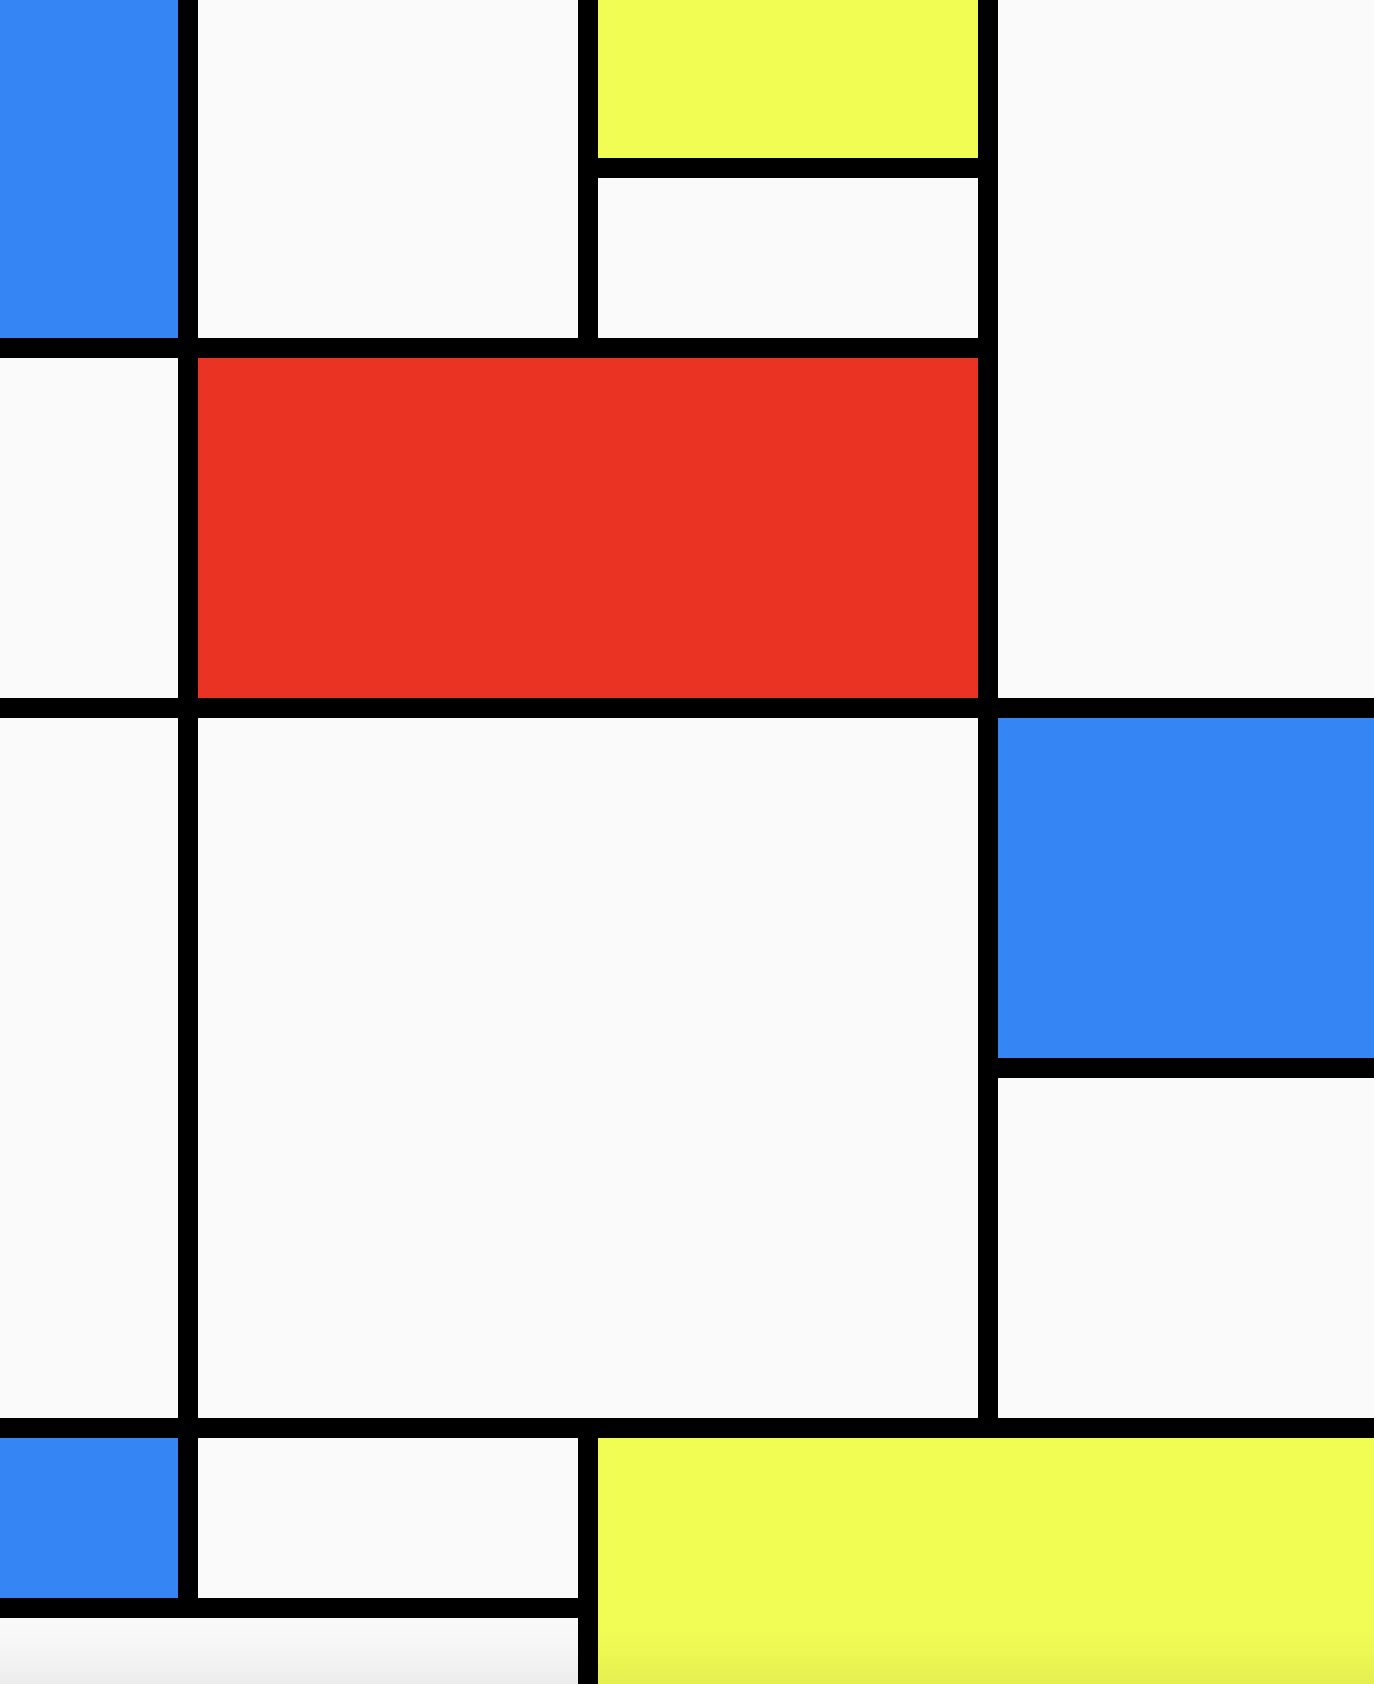 Mondrian painting 2D and 3D screeshot